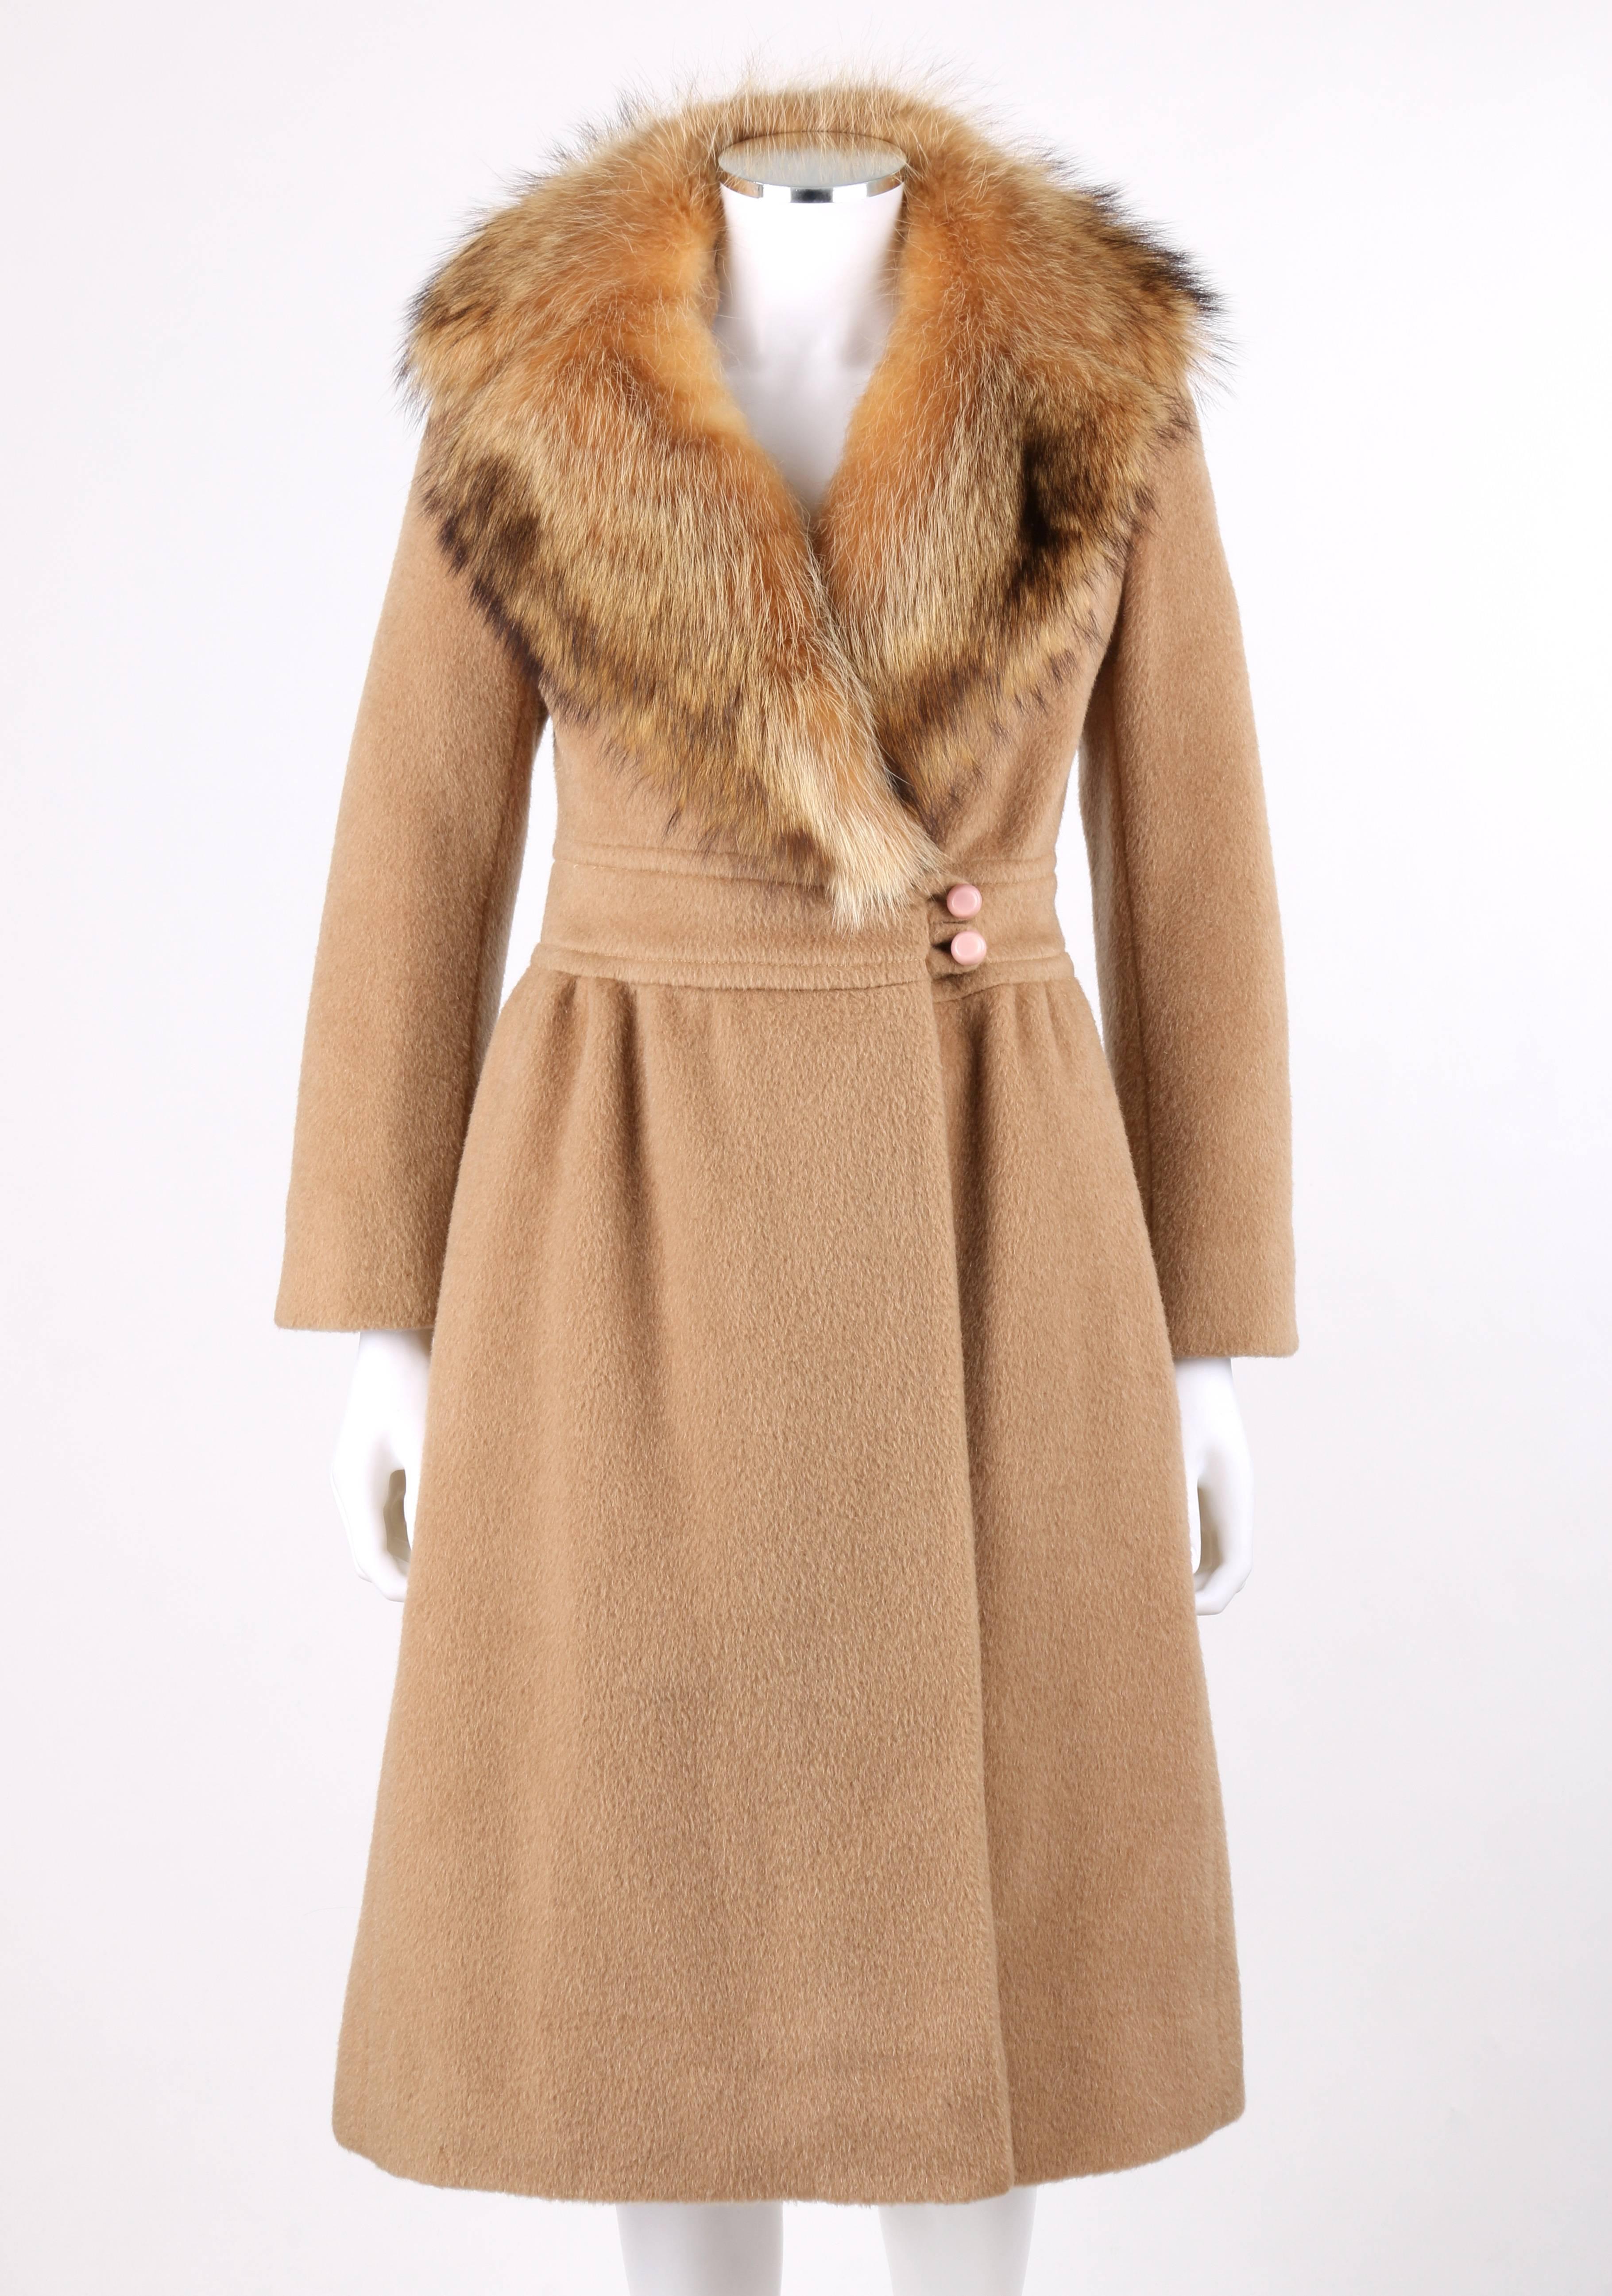 Vintage Pierre Cardin c.1970's camel wool genuine fox fur collar princess coat. Rounded notched lapel fox fur collar. Long sleeves with single button detail and slit at cuff. Princess seams. Banded waist with two button and loop closures at left